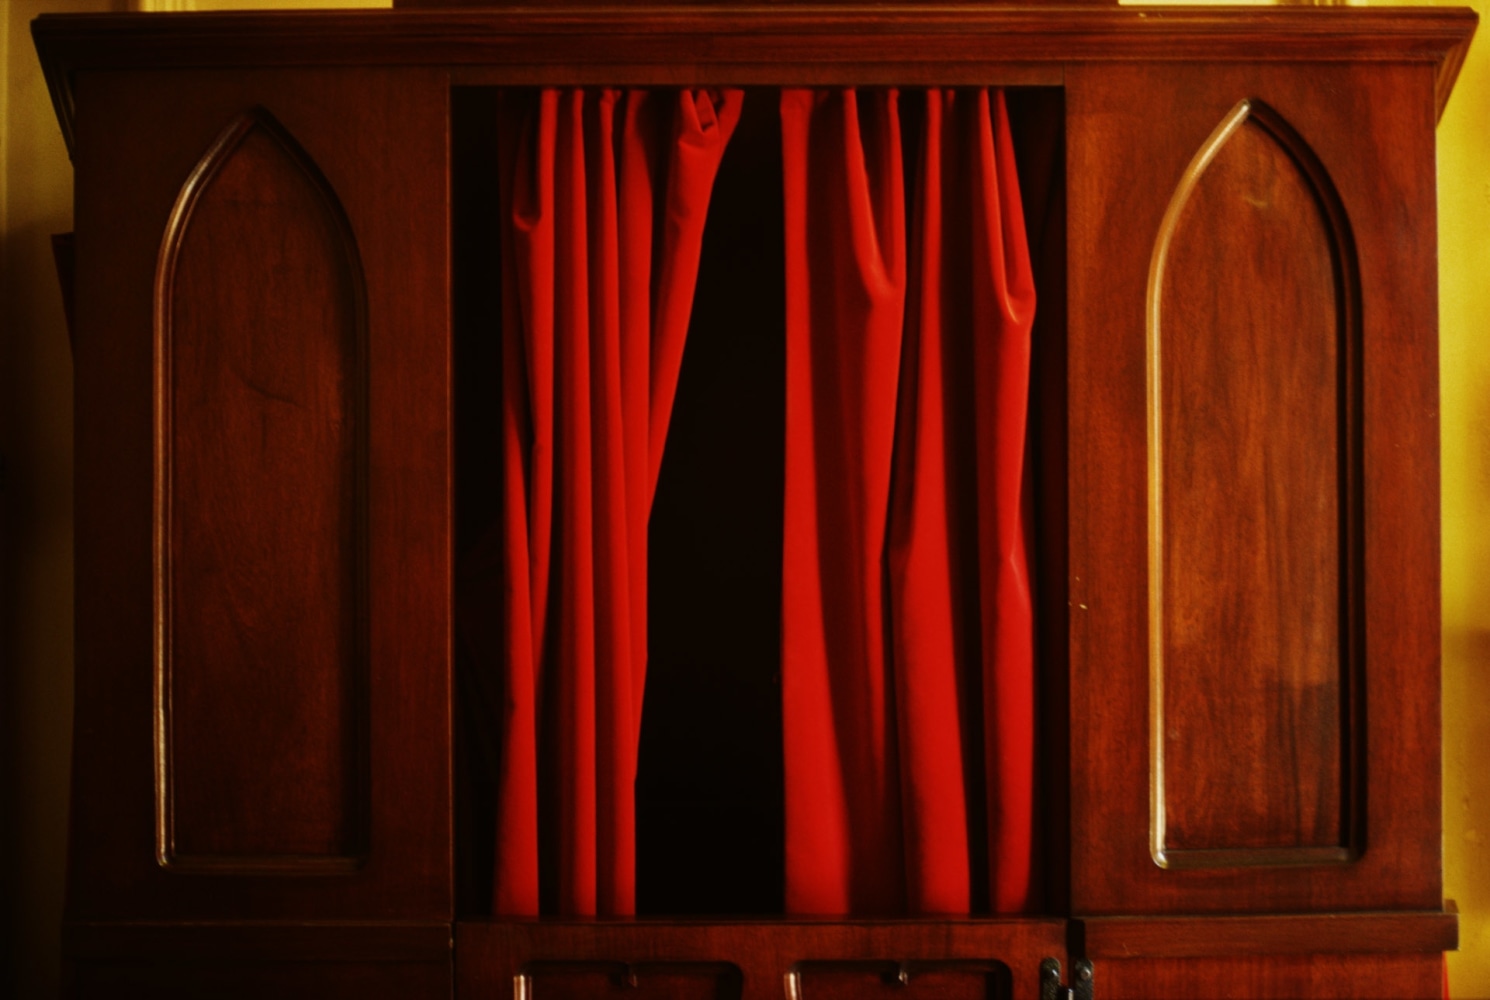 Image of a confessional booth with a red curtain, half pulled back, by Mickey Aloisio